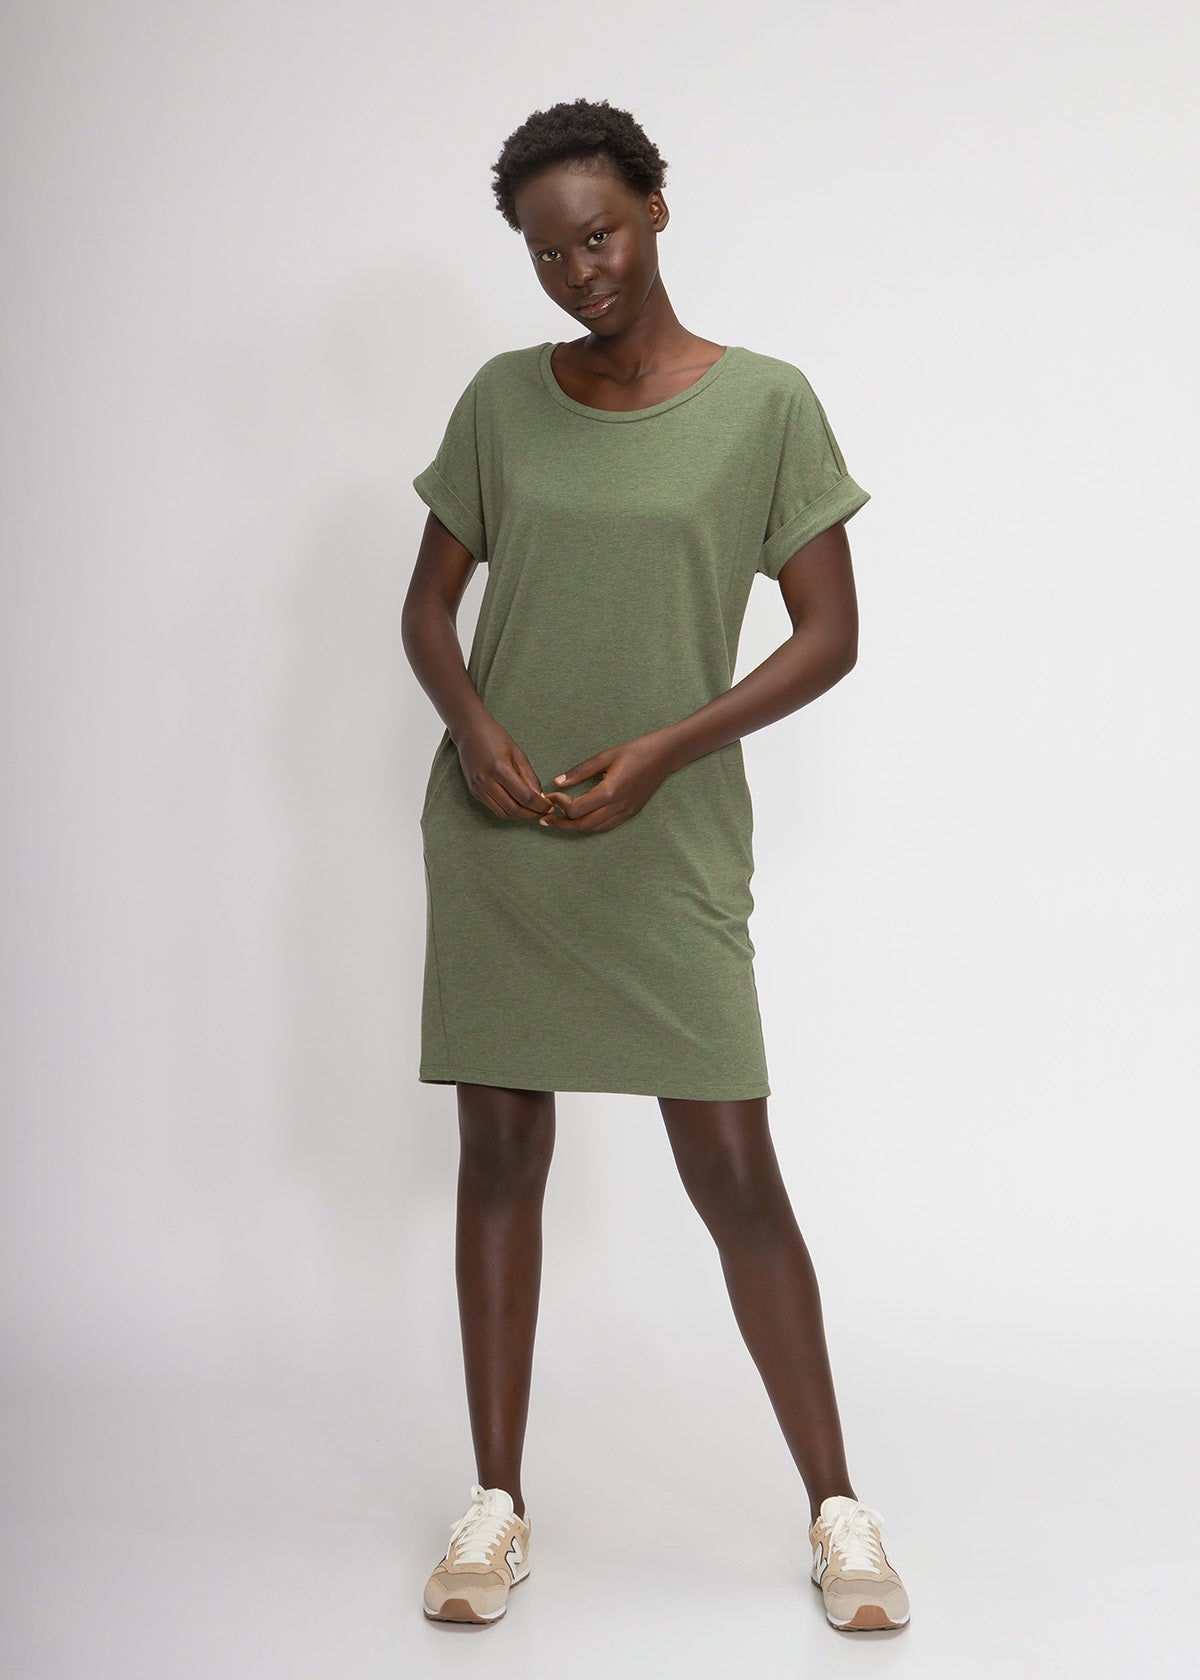 Dress - Women's Relaxed T-Shirt Dress With Pockets In Supima Cotton Stretch